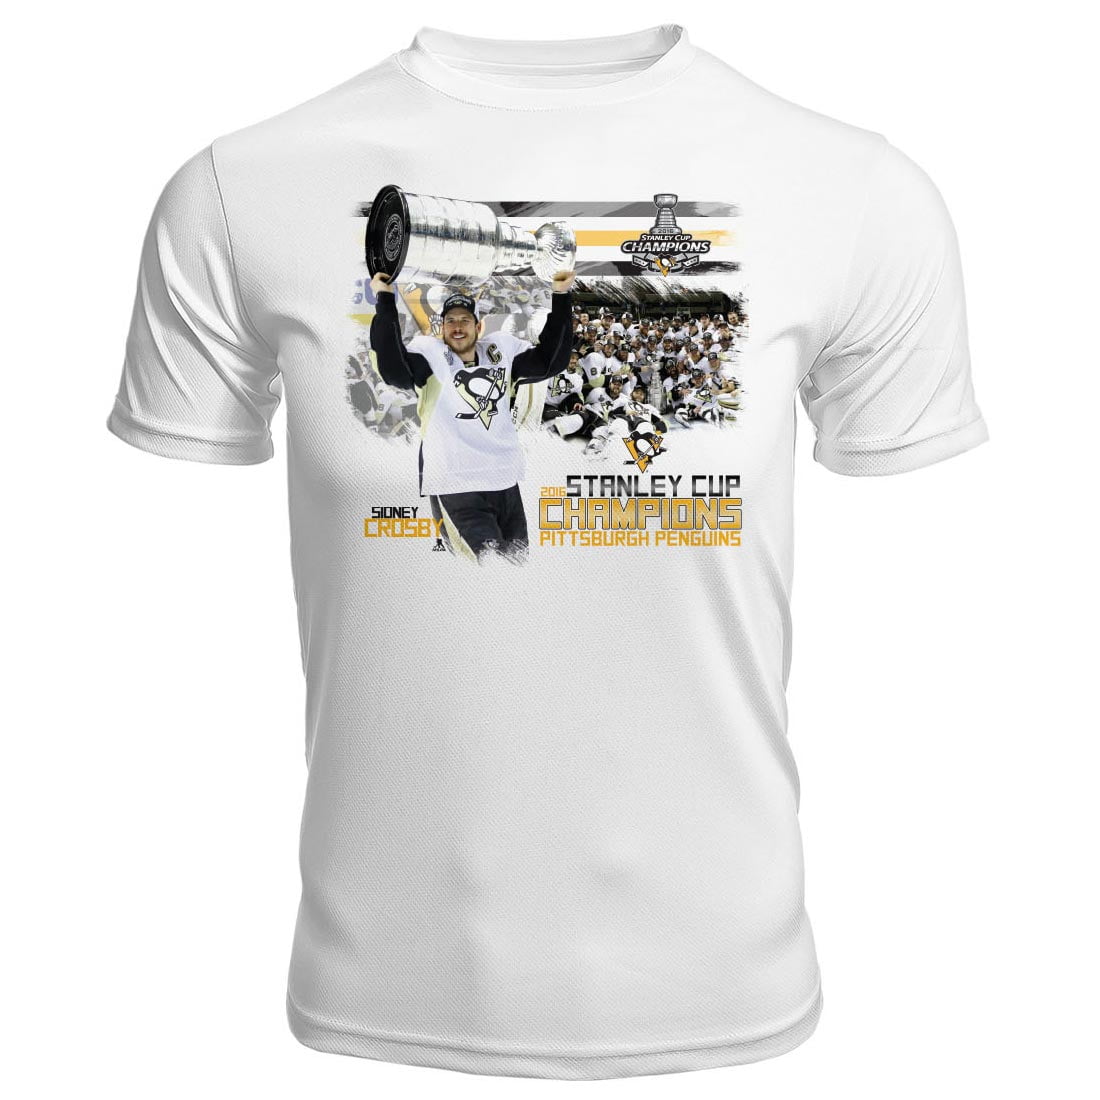 pittsburgh penguins 2016 stanley cup champions shirt